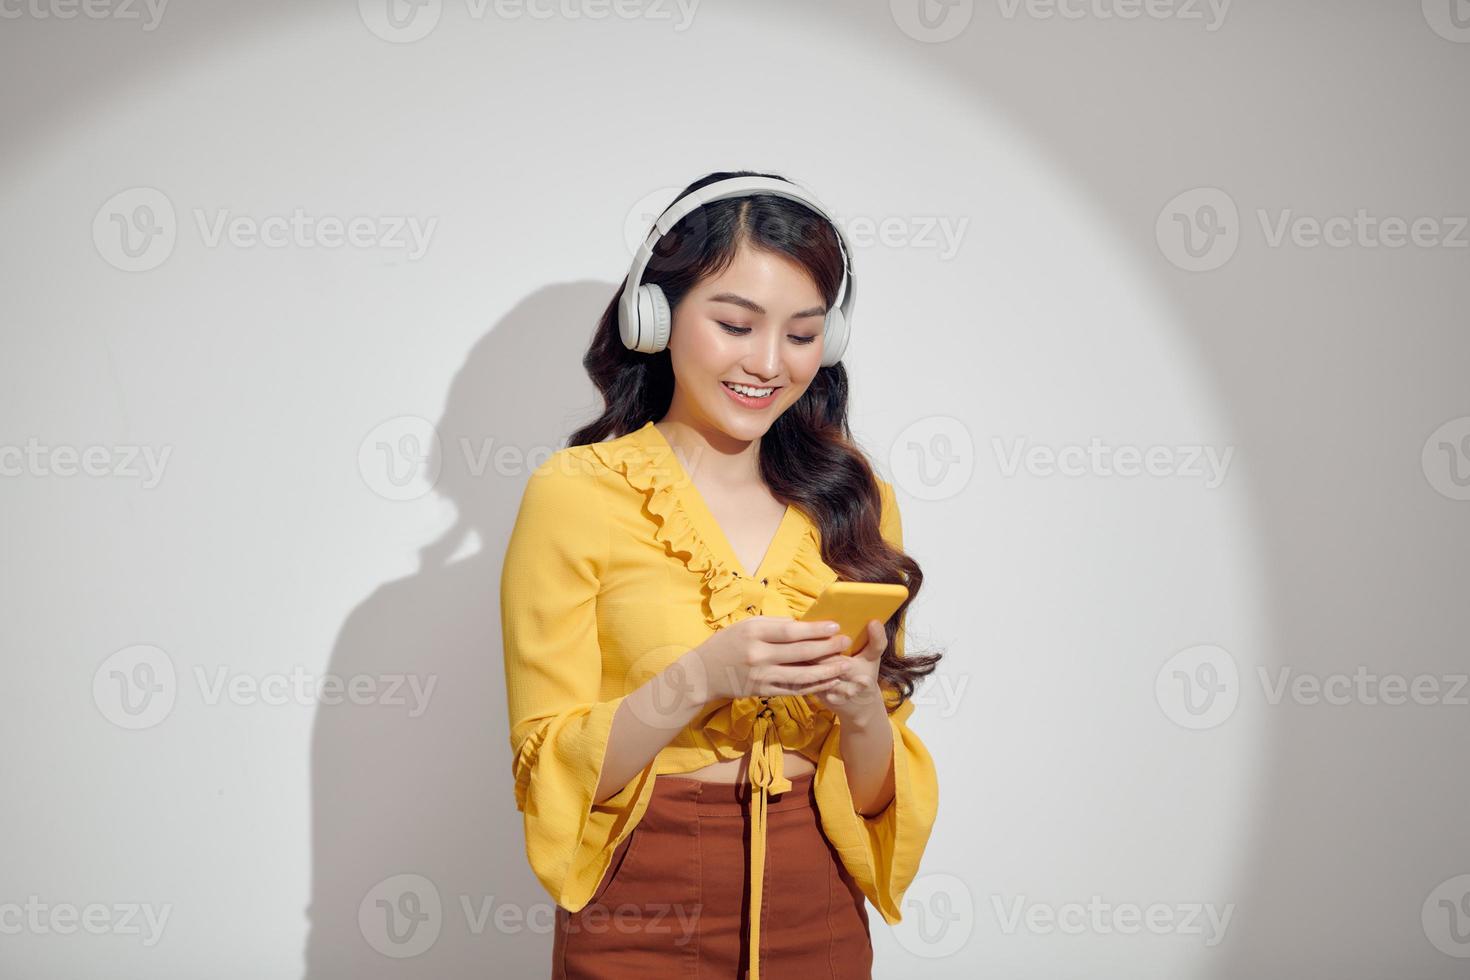 Cheerful woman listening to music with headphones isolated over white background, holding mobile phone photo